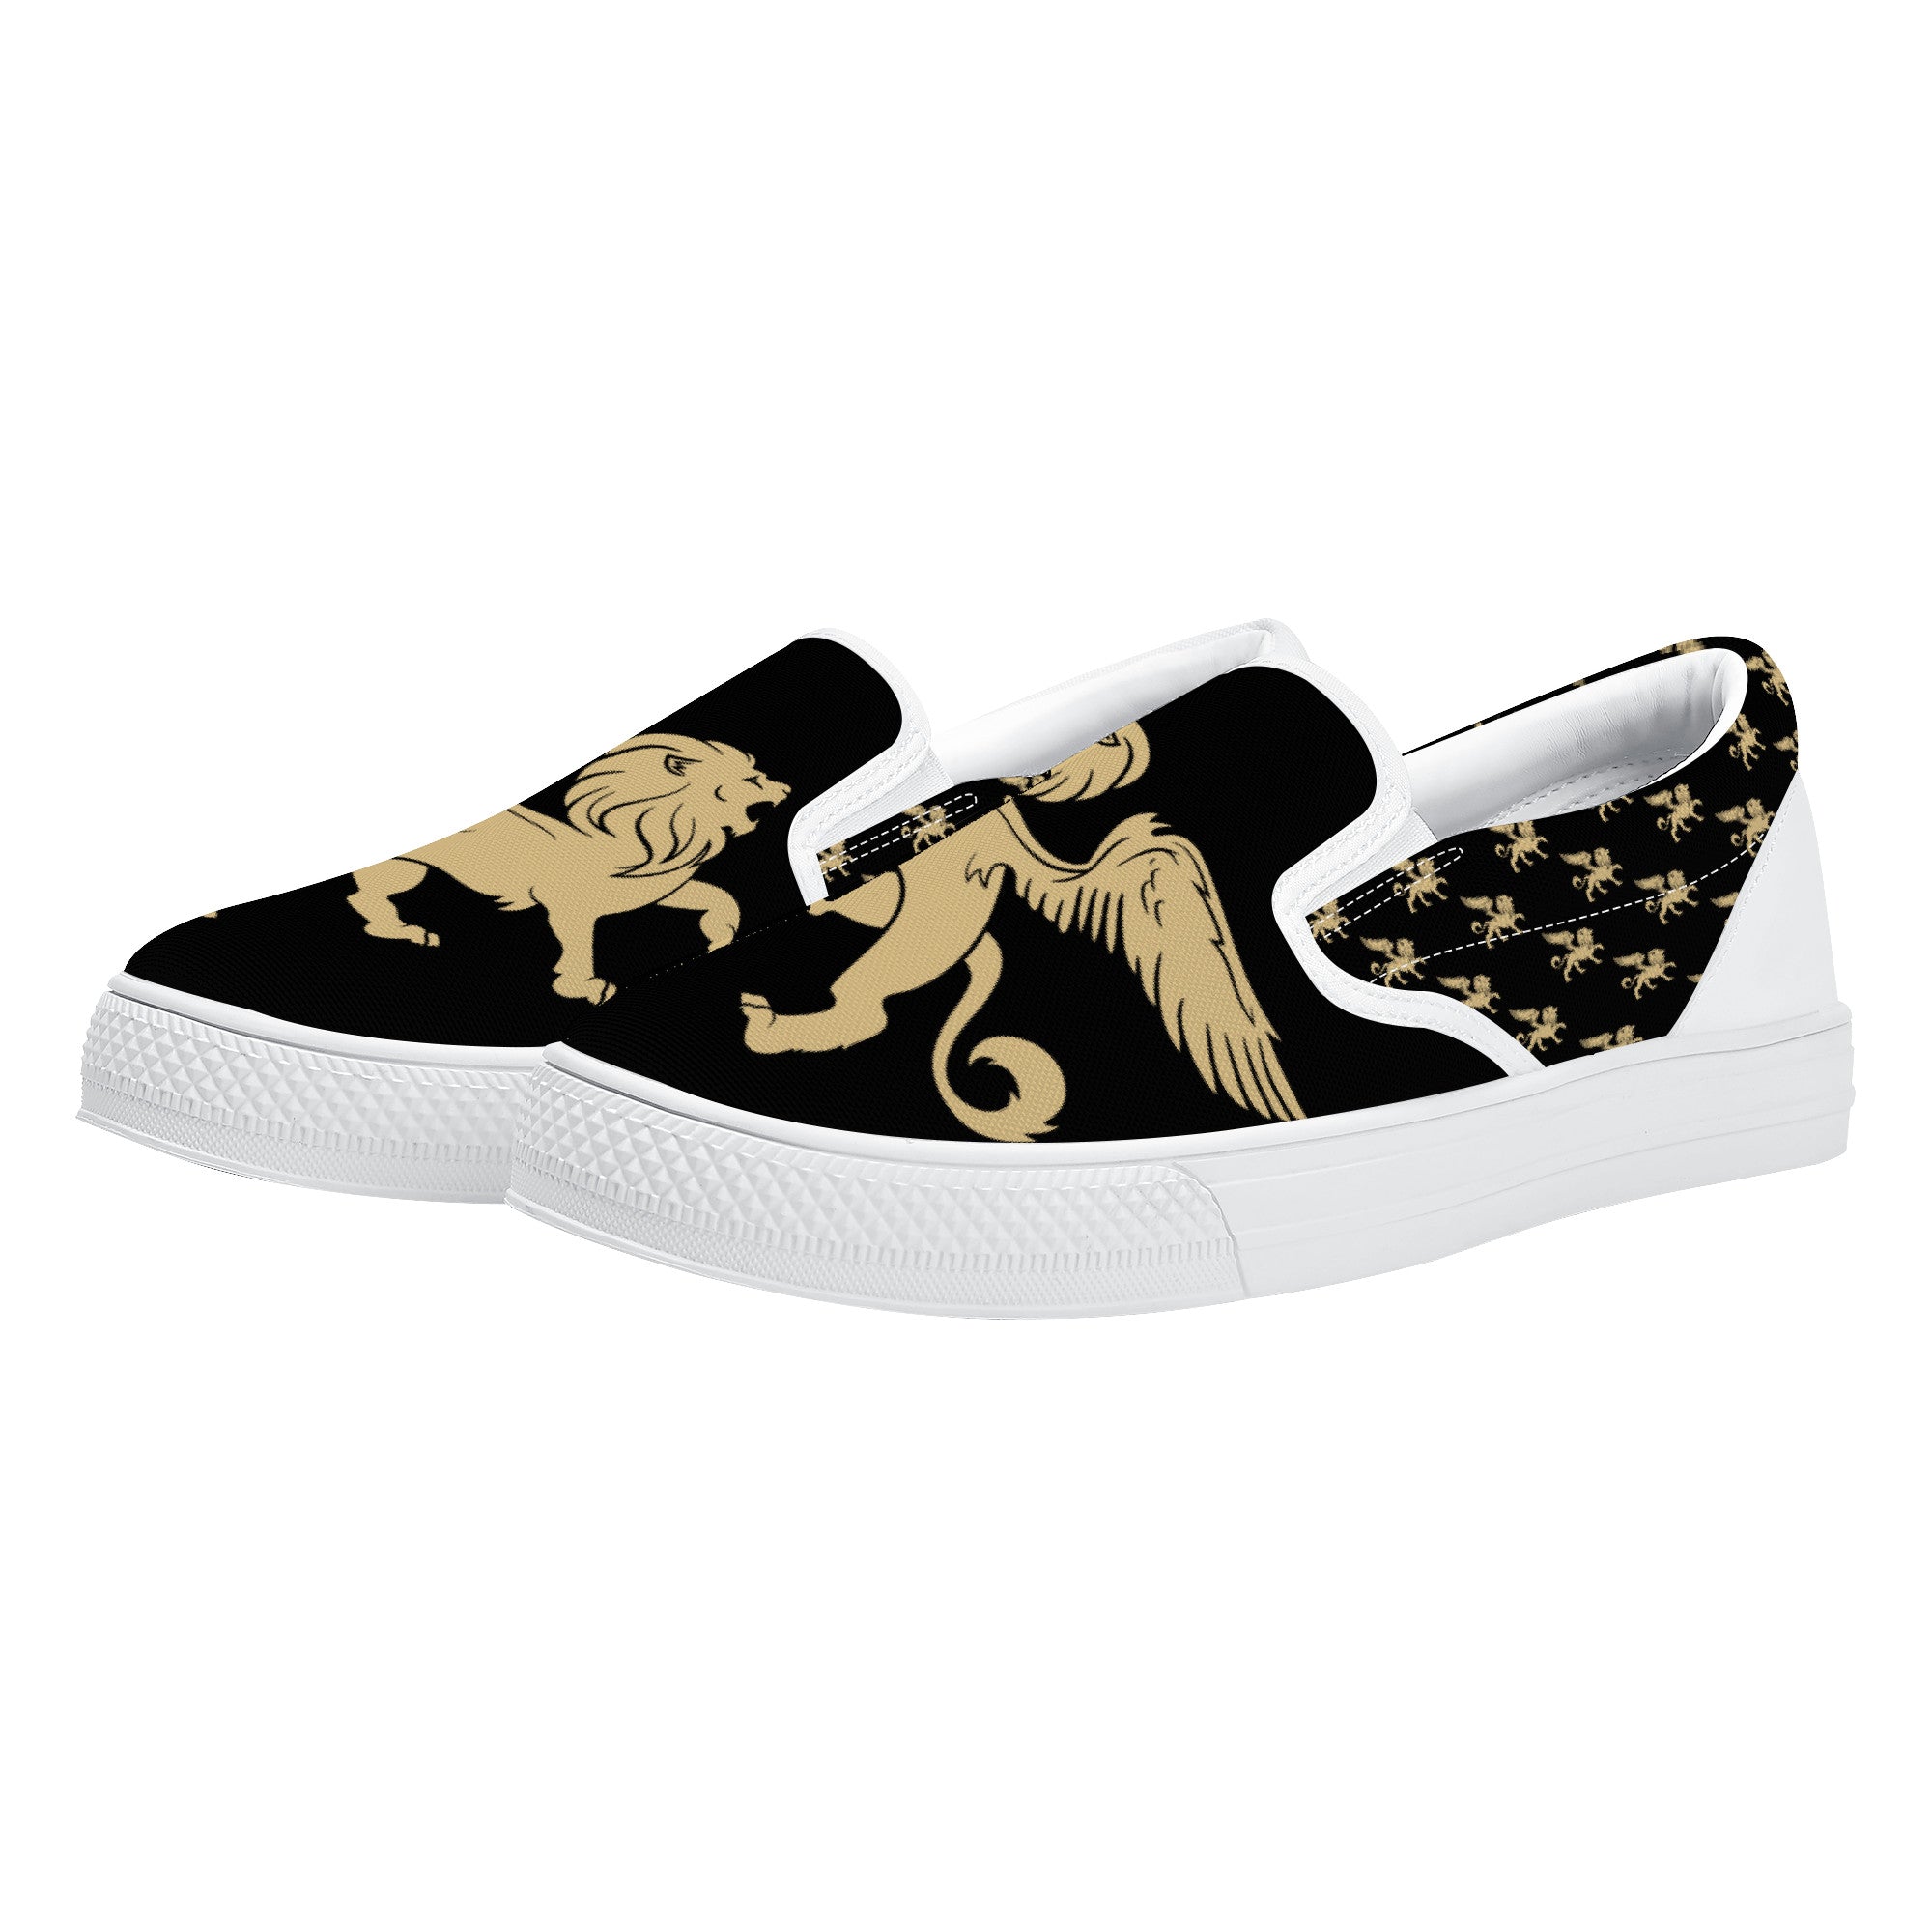 Gold Lion V3 Slip-on Shoes | Low Top Customized | Shoe Zero